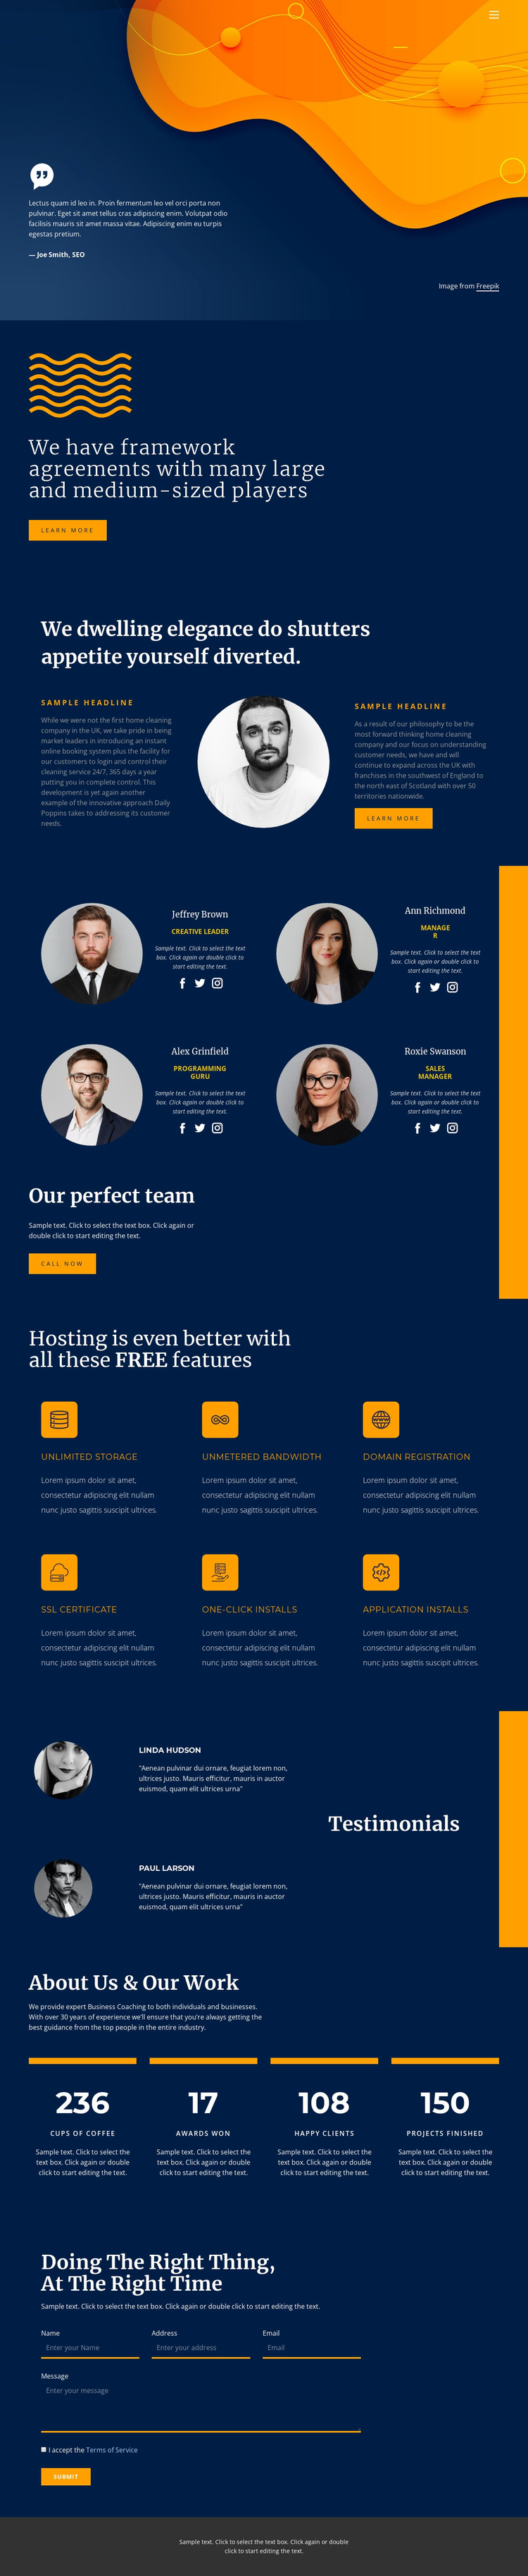 Quality, speed and result Web Design